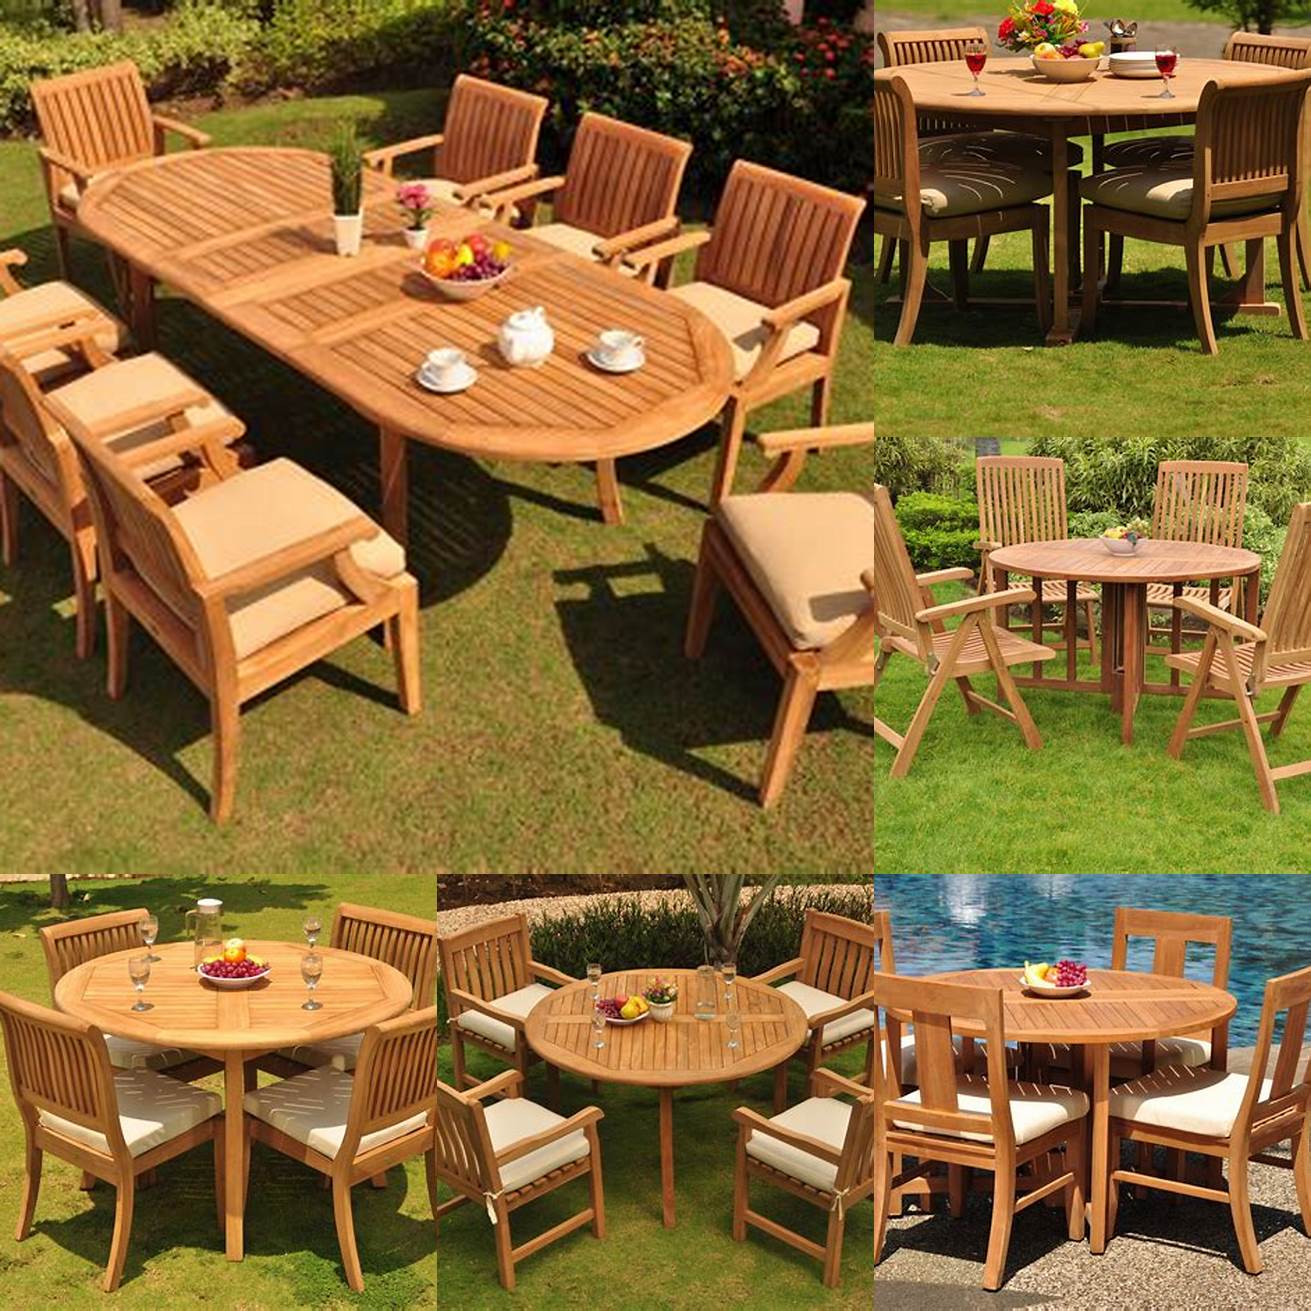 Teak Patio Dining Table and Chairs